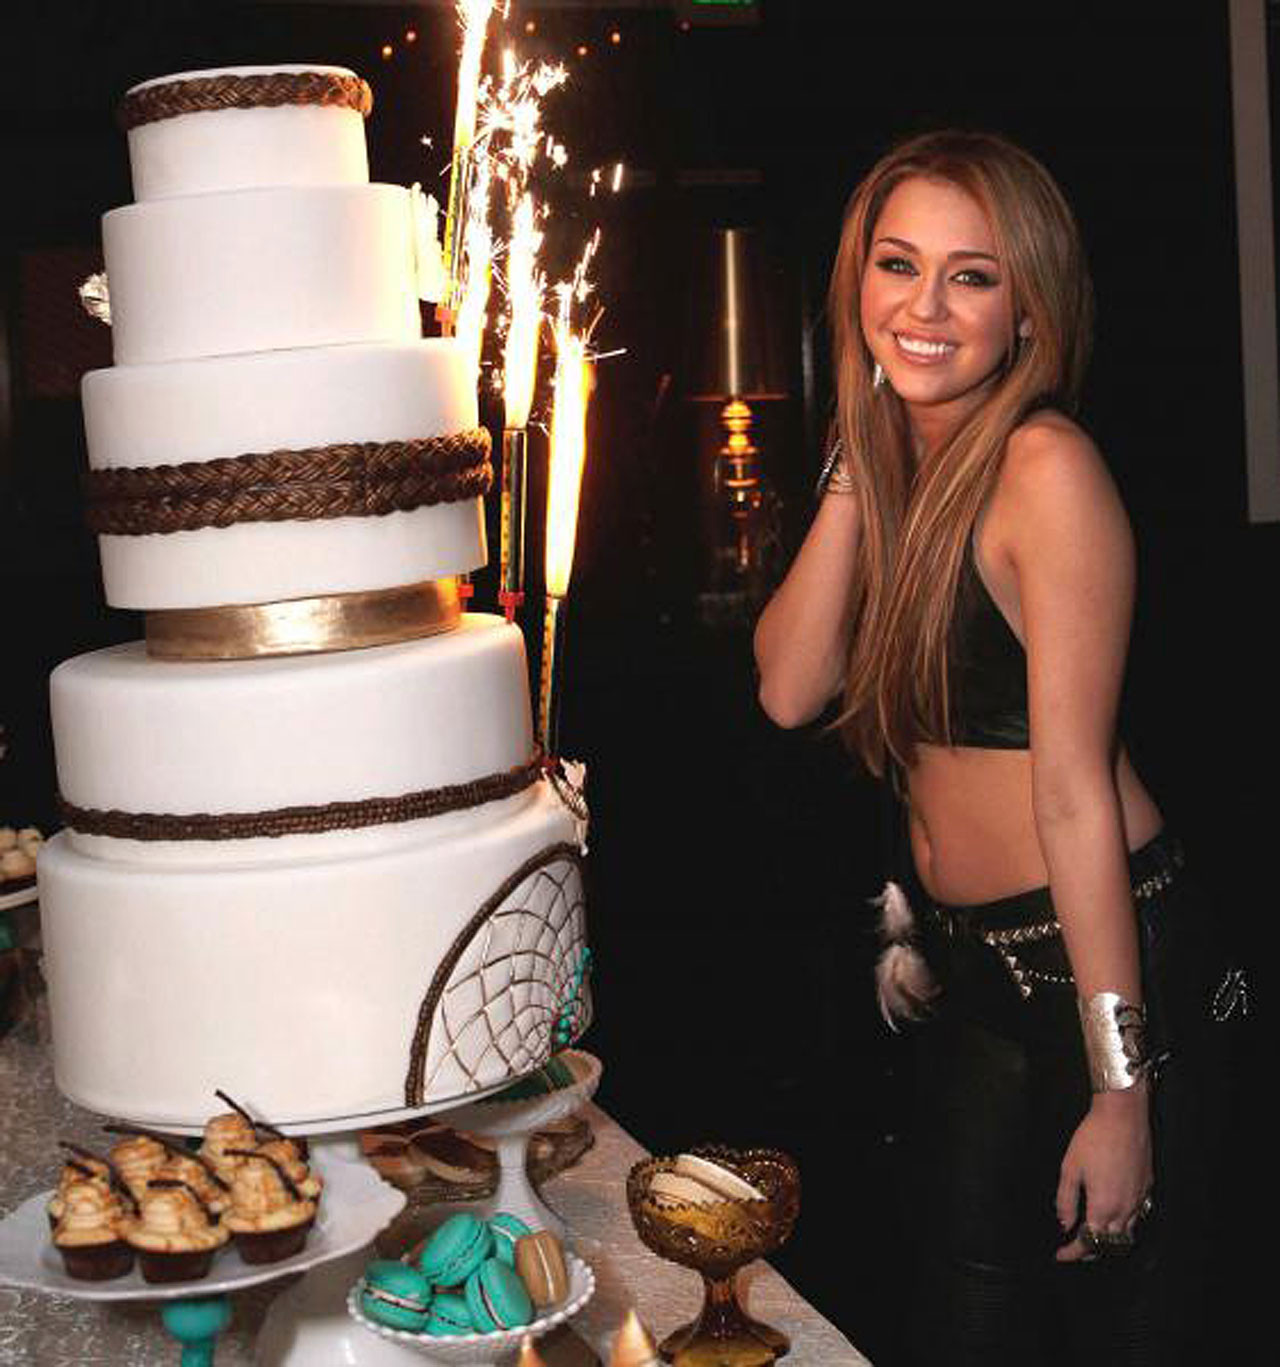 Miley Cyrus young and cute singer celebrated her eighteenth birthday #75325362